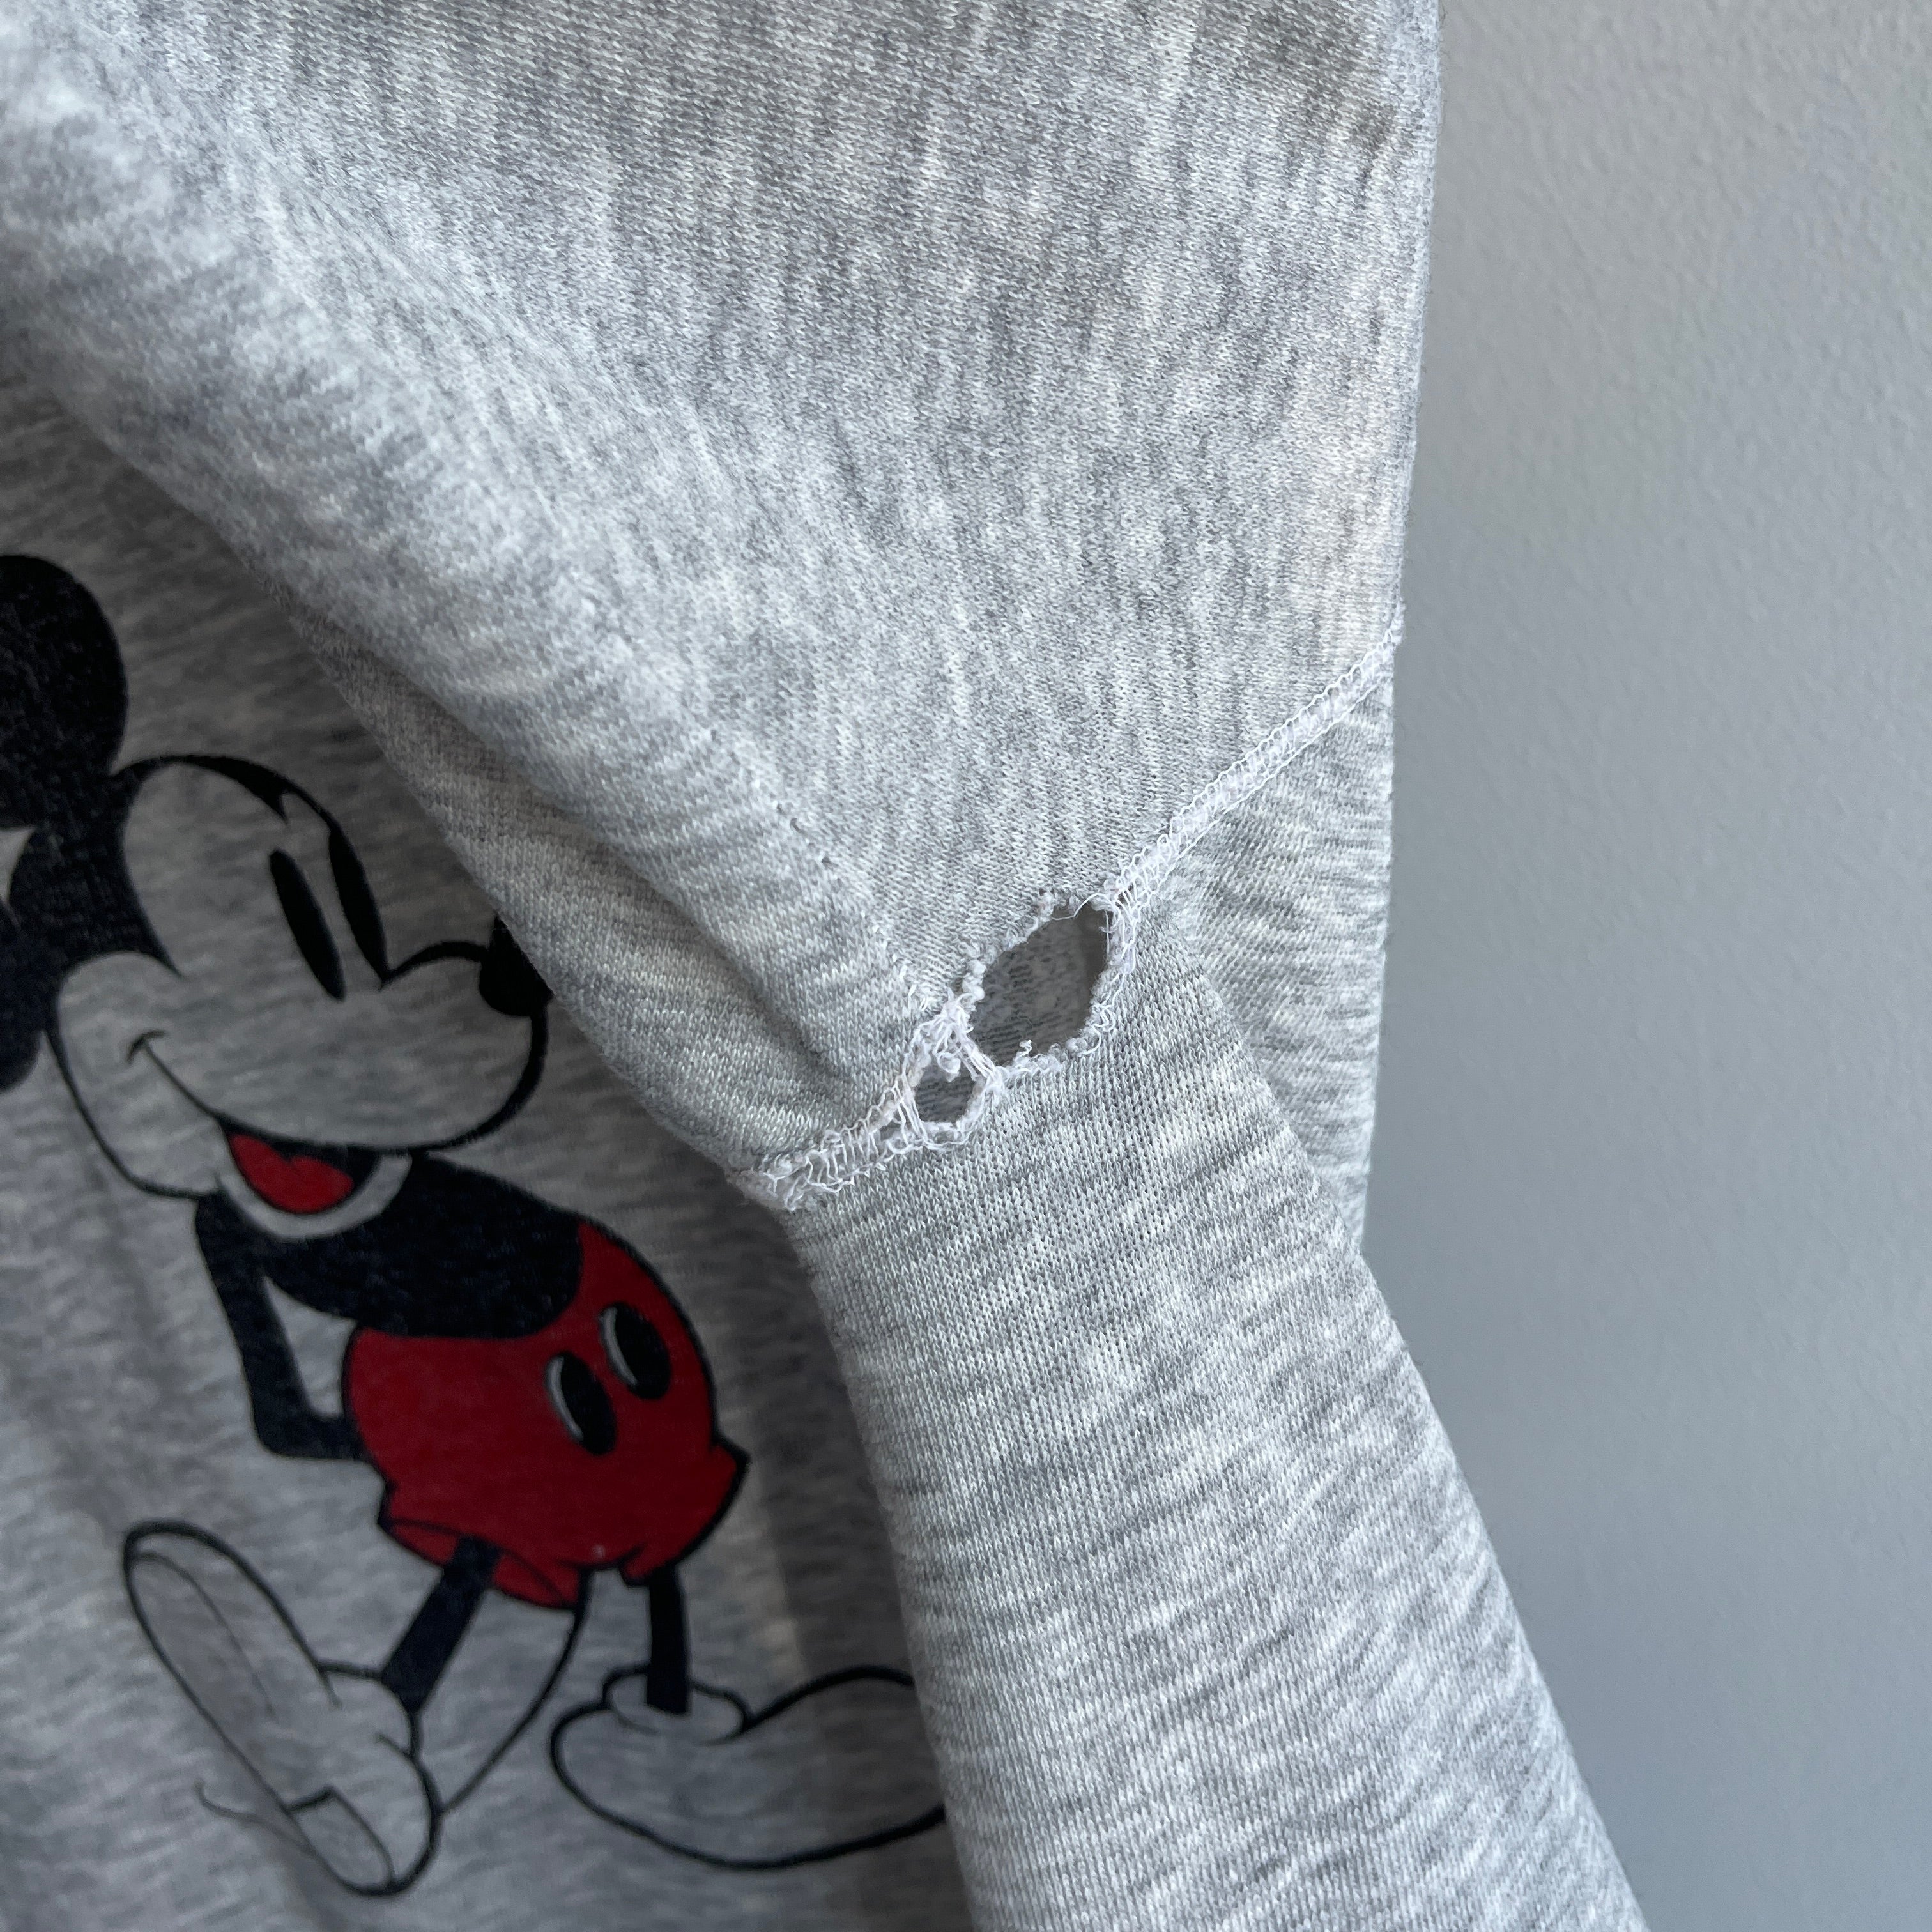 1980s Thinned Out Tattered and Torn Mickey Raglan Sweatshirt - Collectible